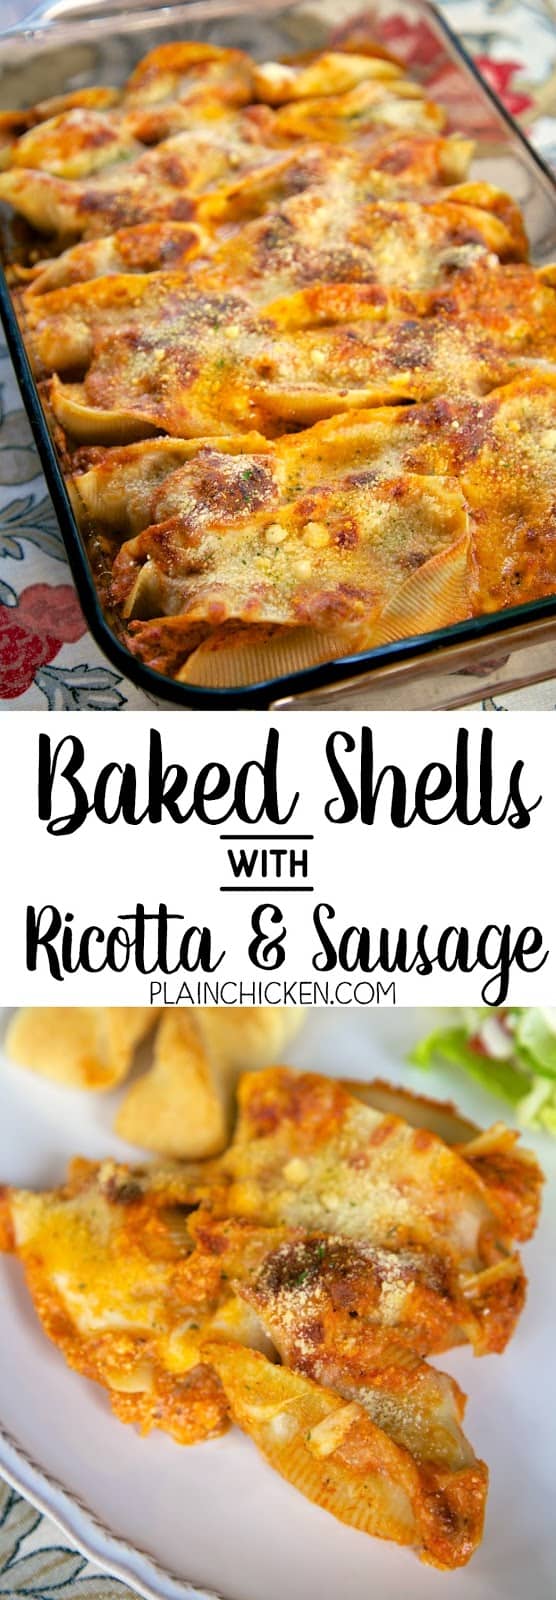 Baked Shells with Ricotta and Sausage Recipe - THE BEST baked shells!! Only a few simple ingredients - jumbo pasta shells, Italian sausage, spaghetti sauce, ricotta and parmesan. Can make ahead and freeze for later. Leftover are awesome. We ate this 3 days in a row. I was so sad when it was gone! Make this!